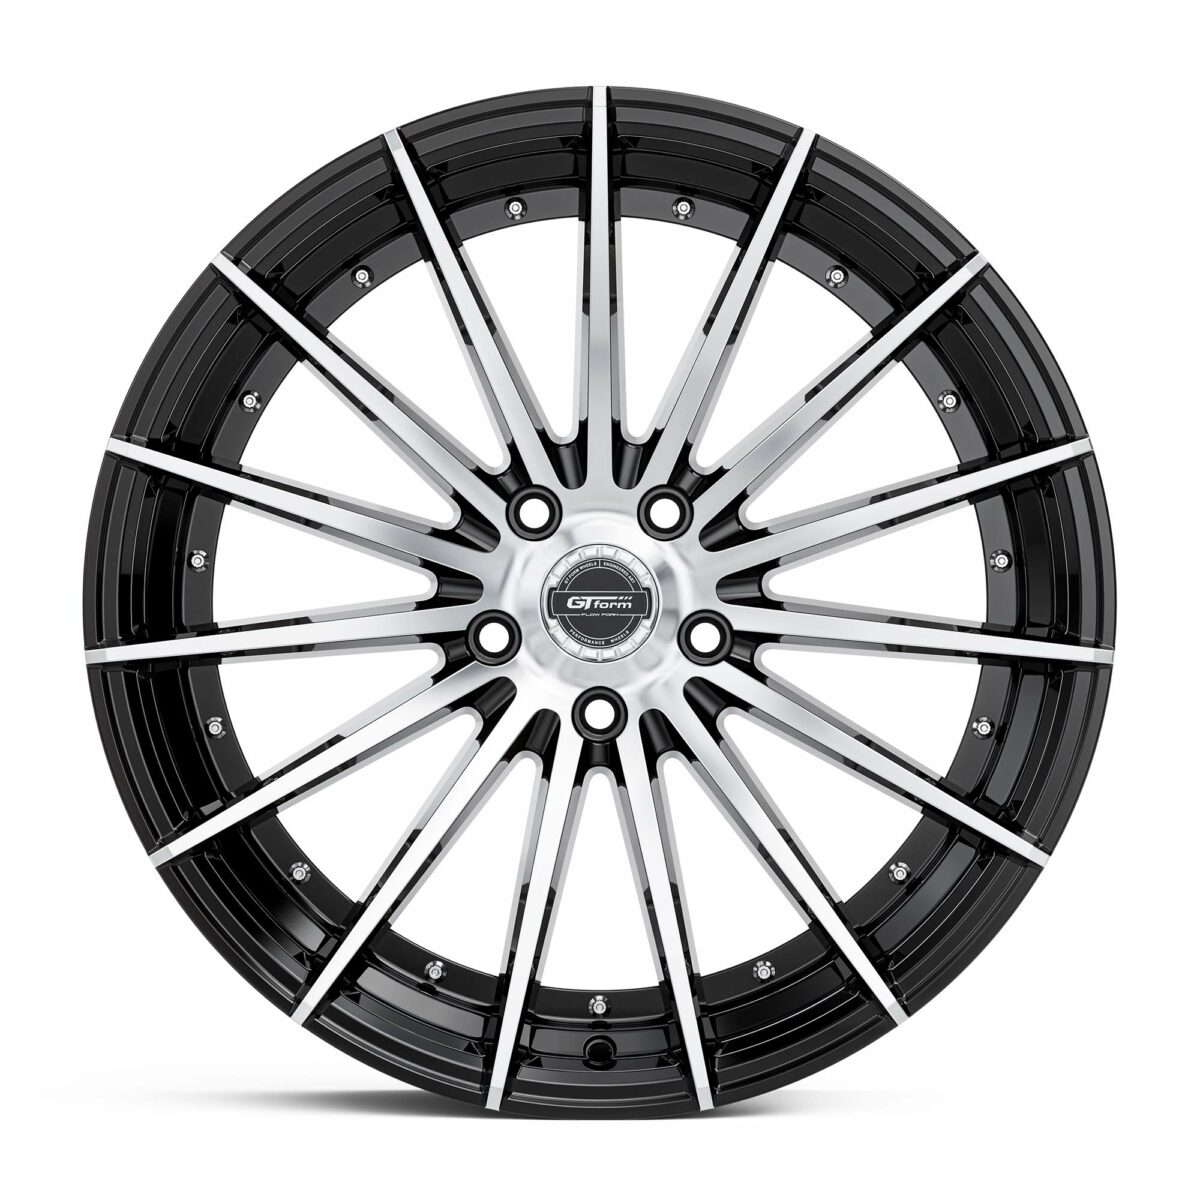 19 inch GT Form Anvil Gloss Black Machined Face Rims Performance Wheels